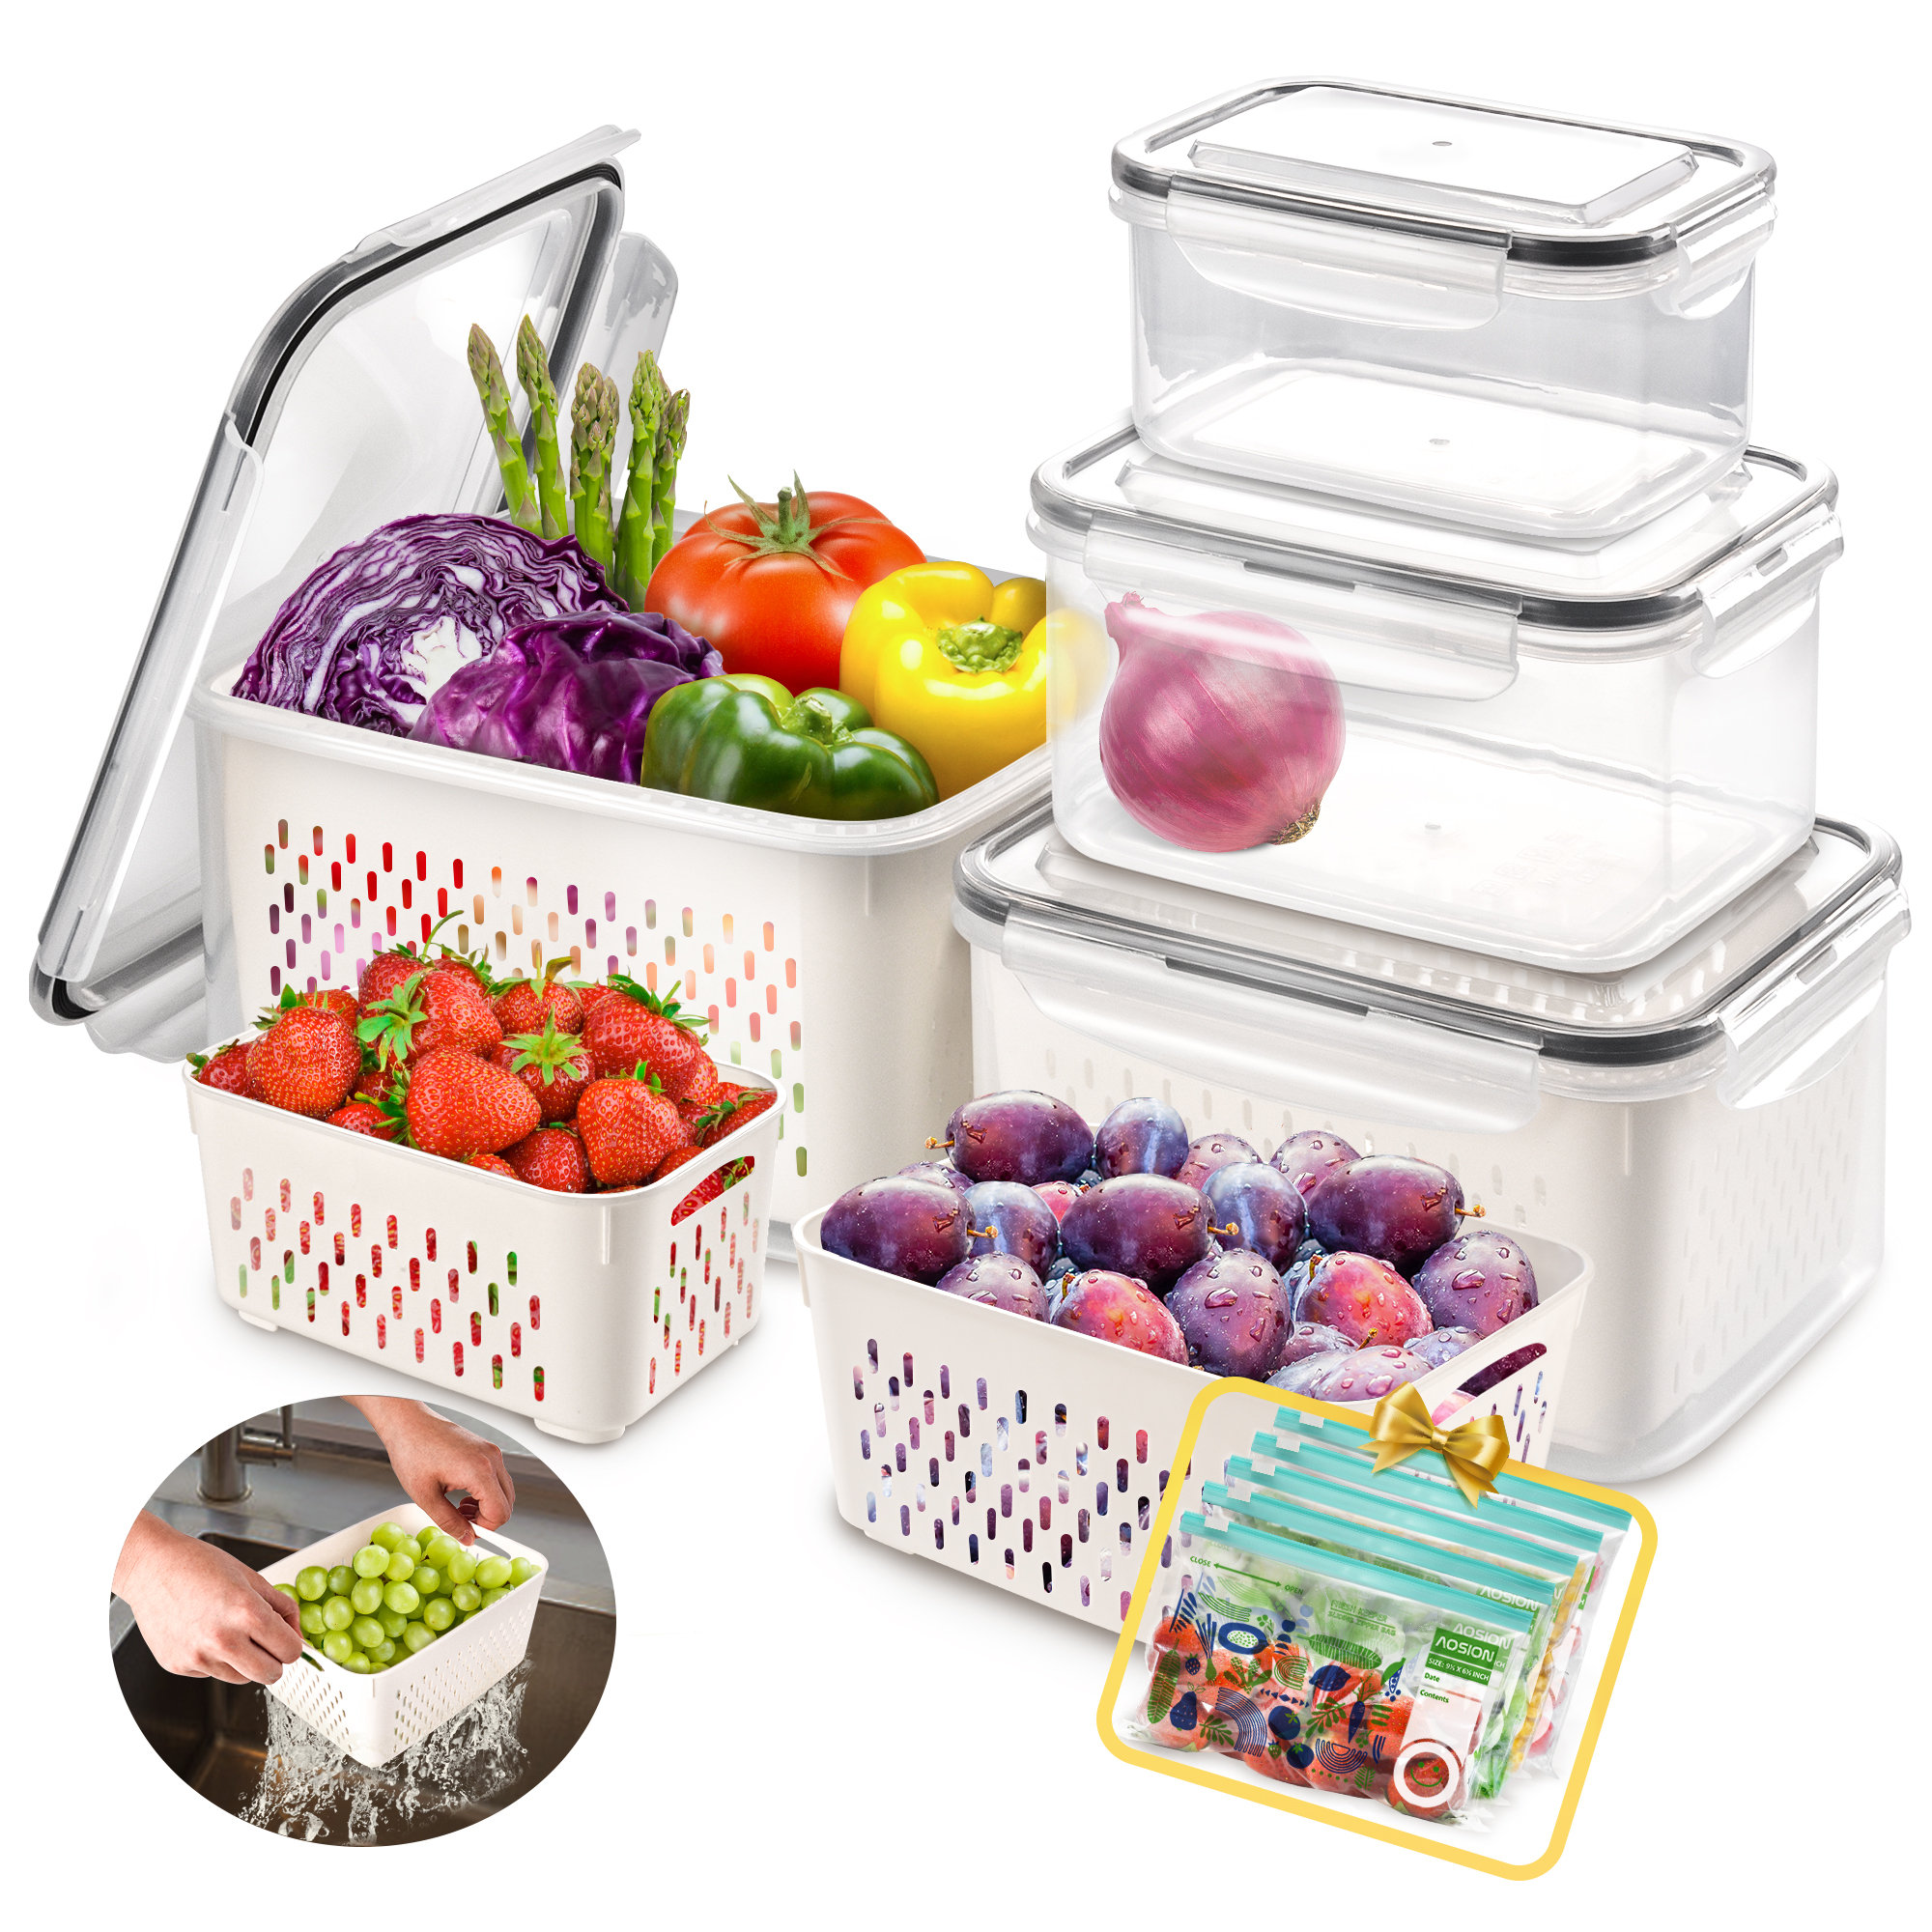 Extra Large Airtight Food Storage Containers - 2 PC 175 oz Each